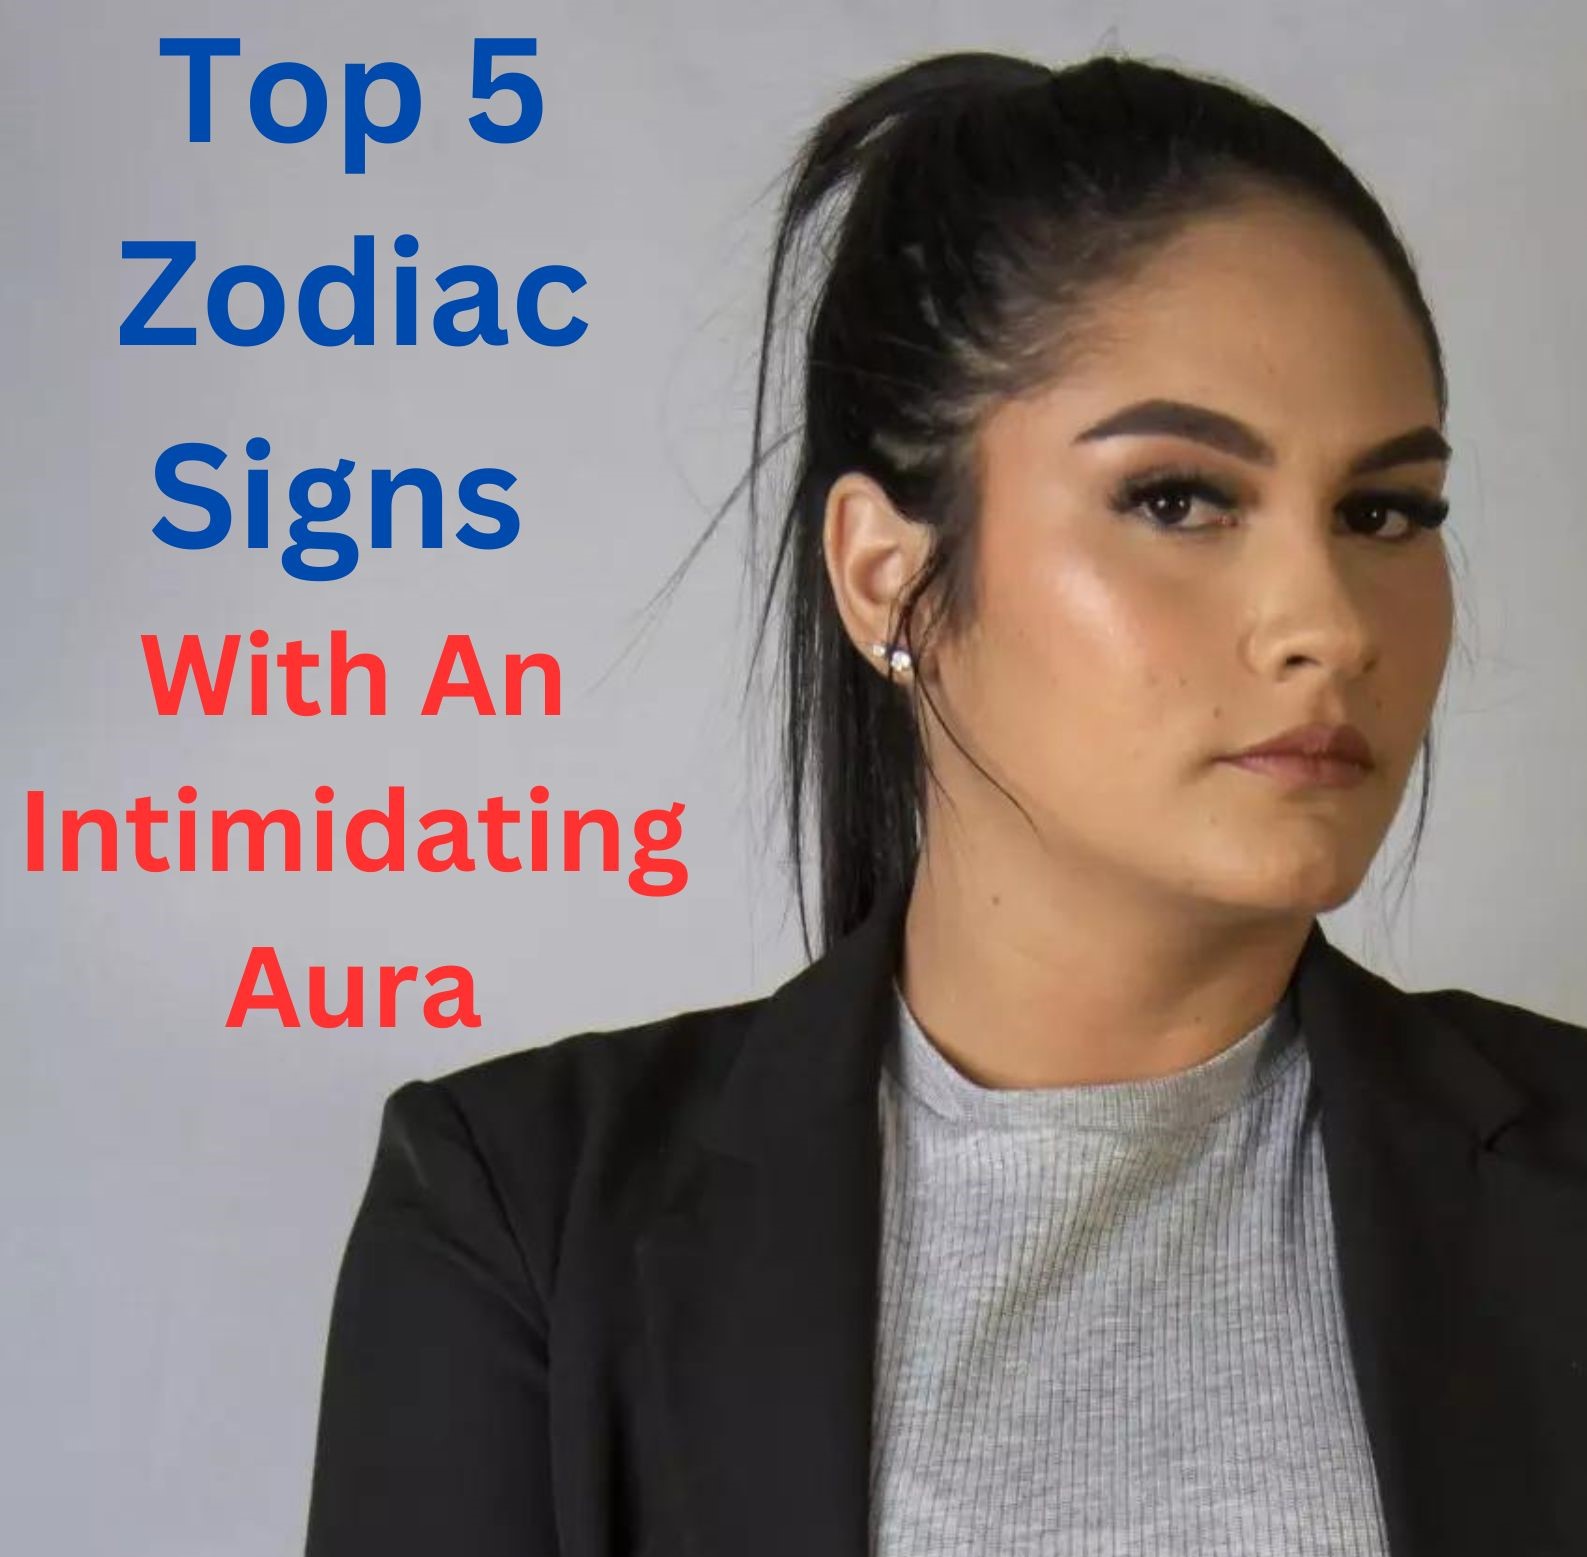 Top 5 Zodiac Signs With An Intimidating Aura